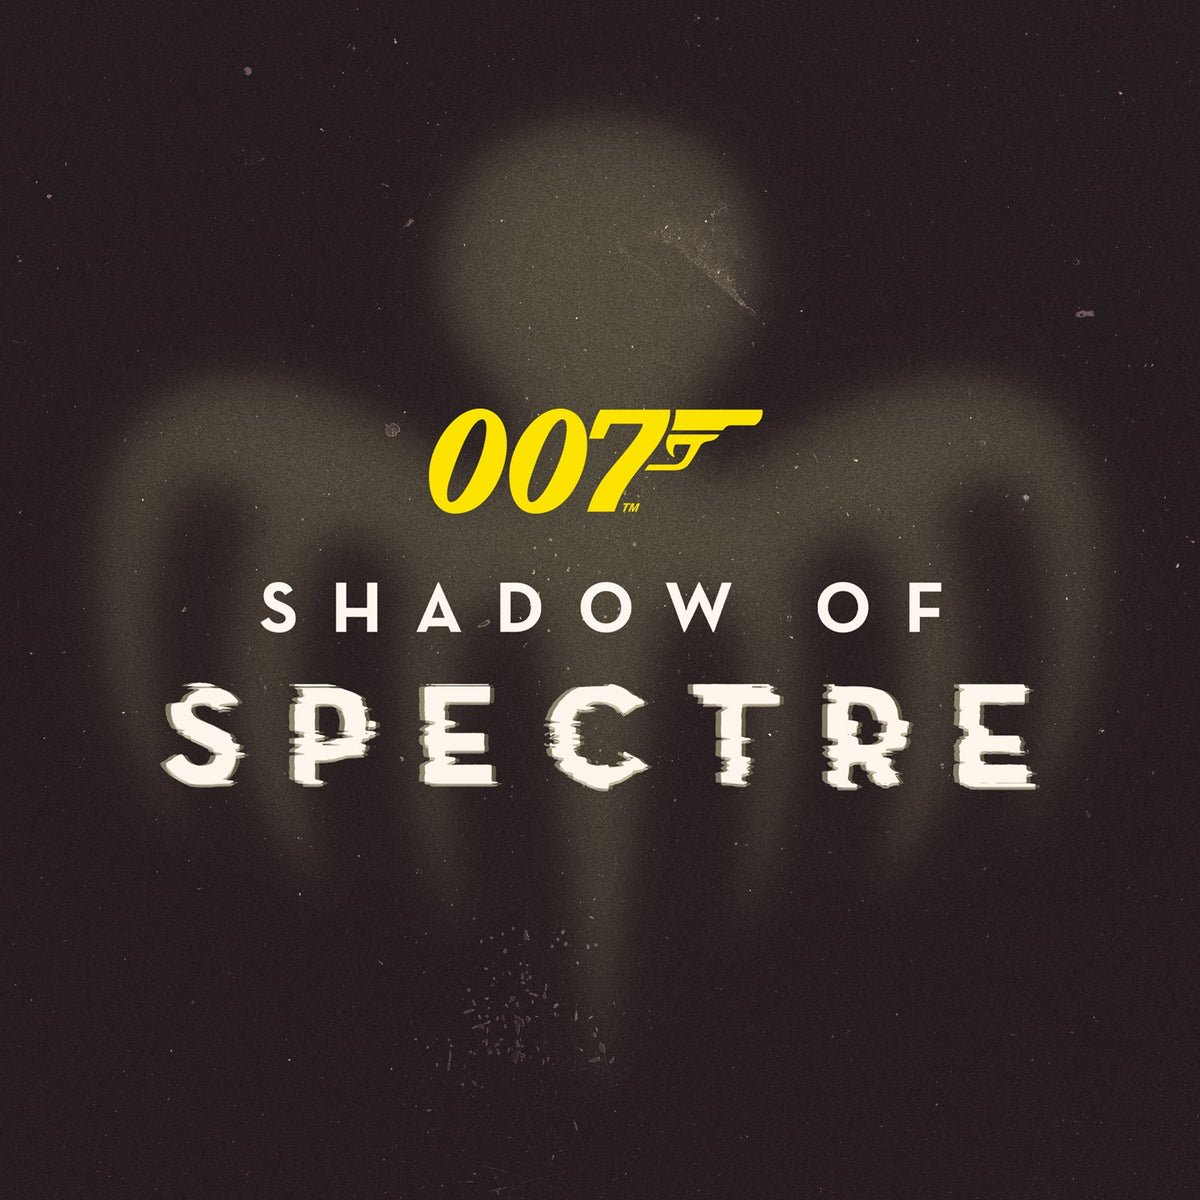 Shadow of SPECTRE Immersive Game Experience - London Gift Voucher - By HiddenCity